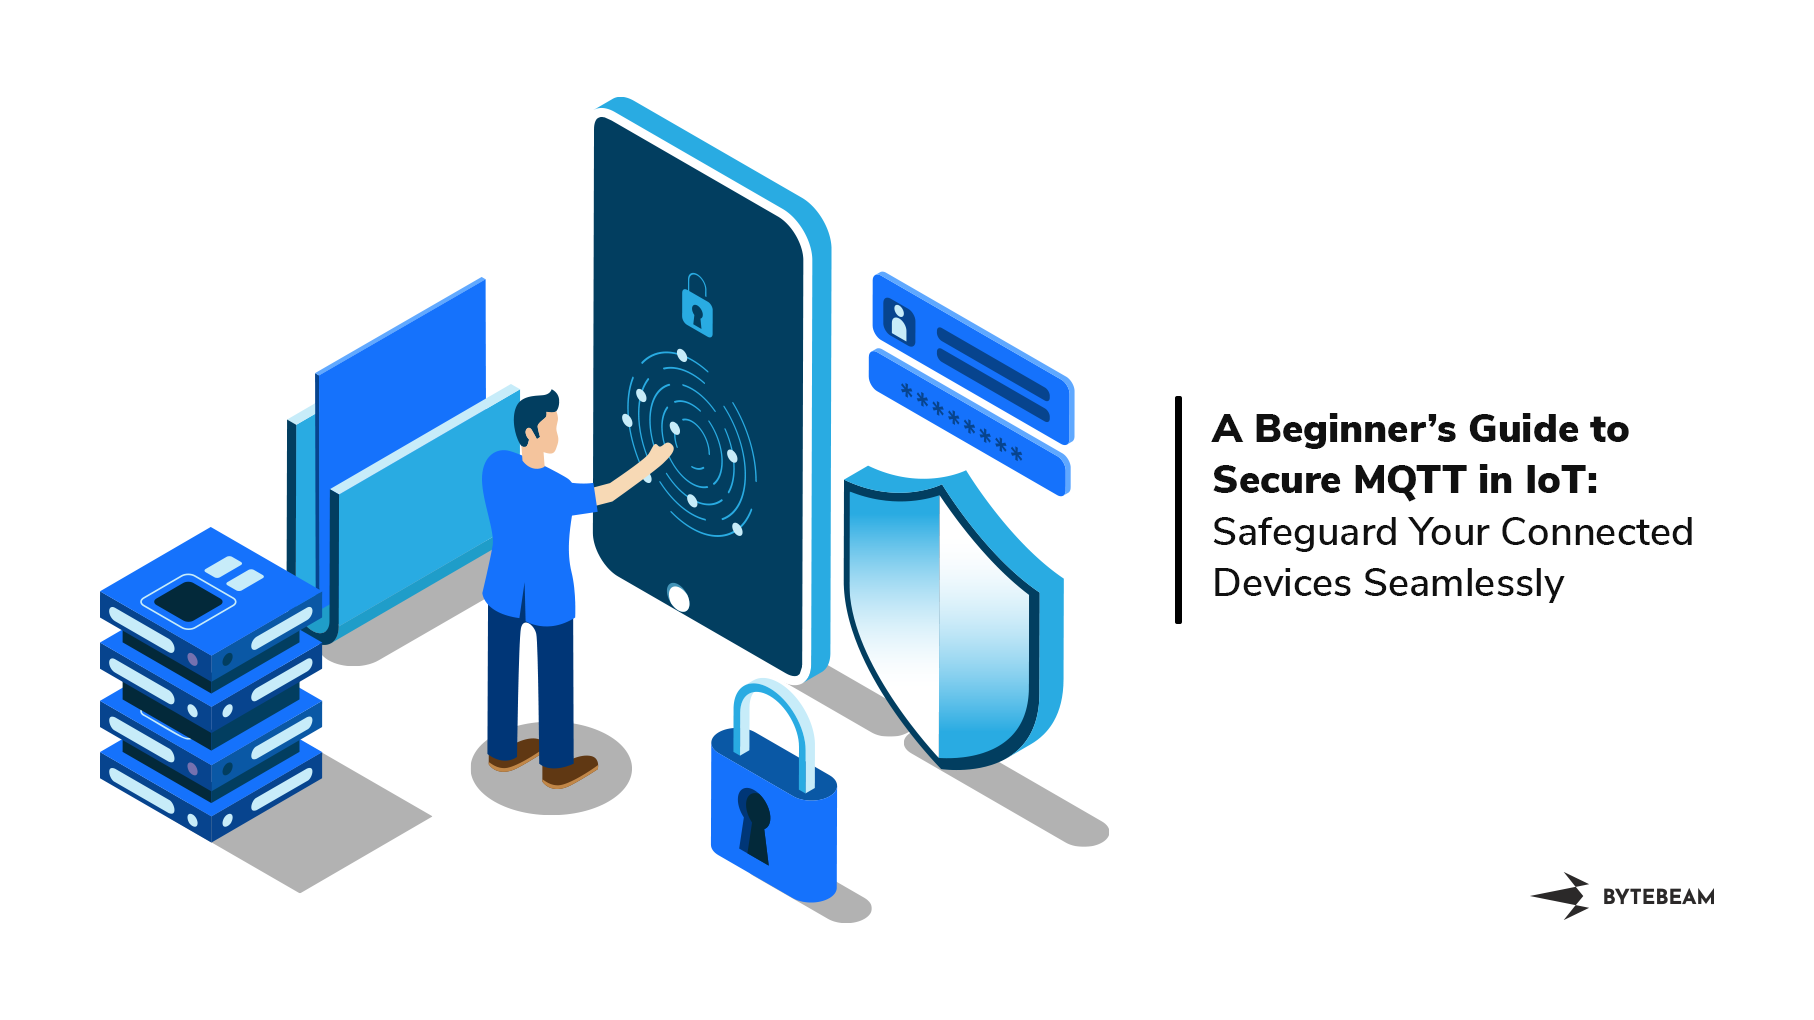 A Beginner’s Guide to Secure MQTT in IoT: Safeguard Your Connected Devices Seamlessly